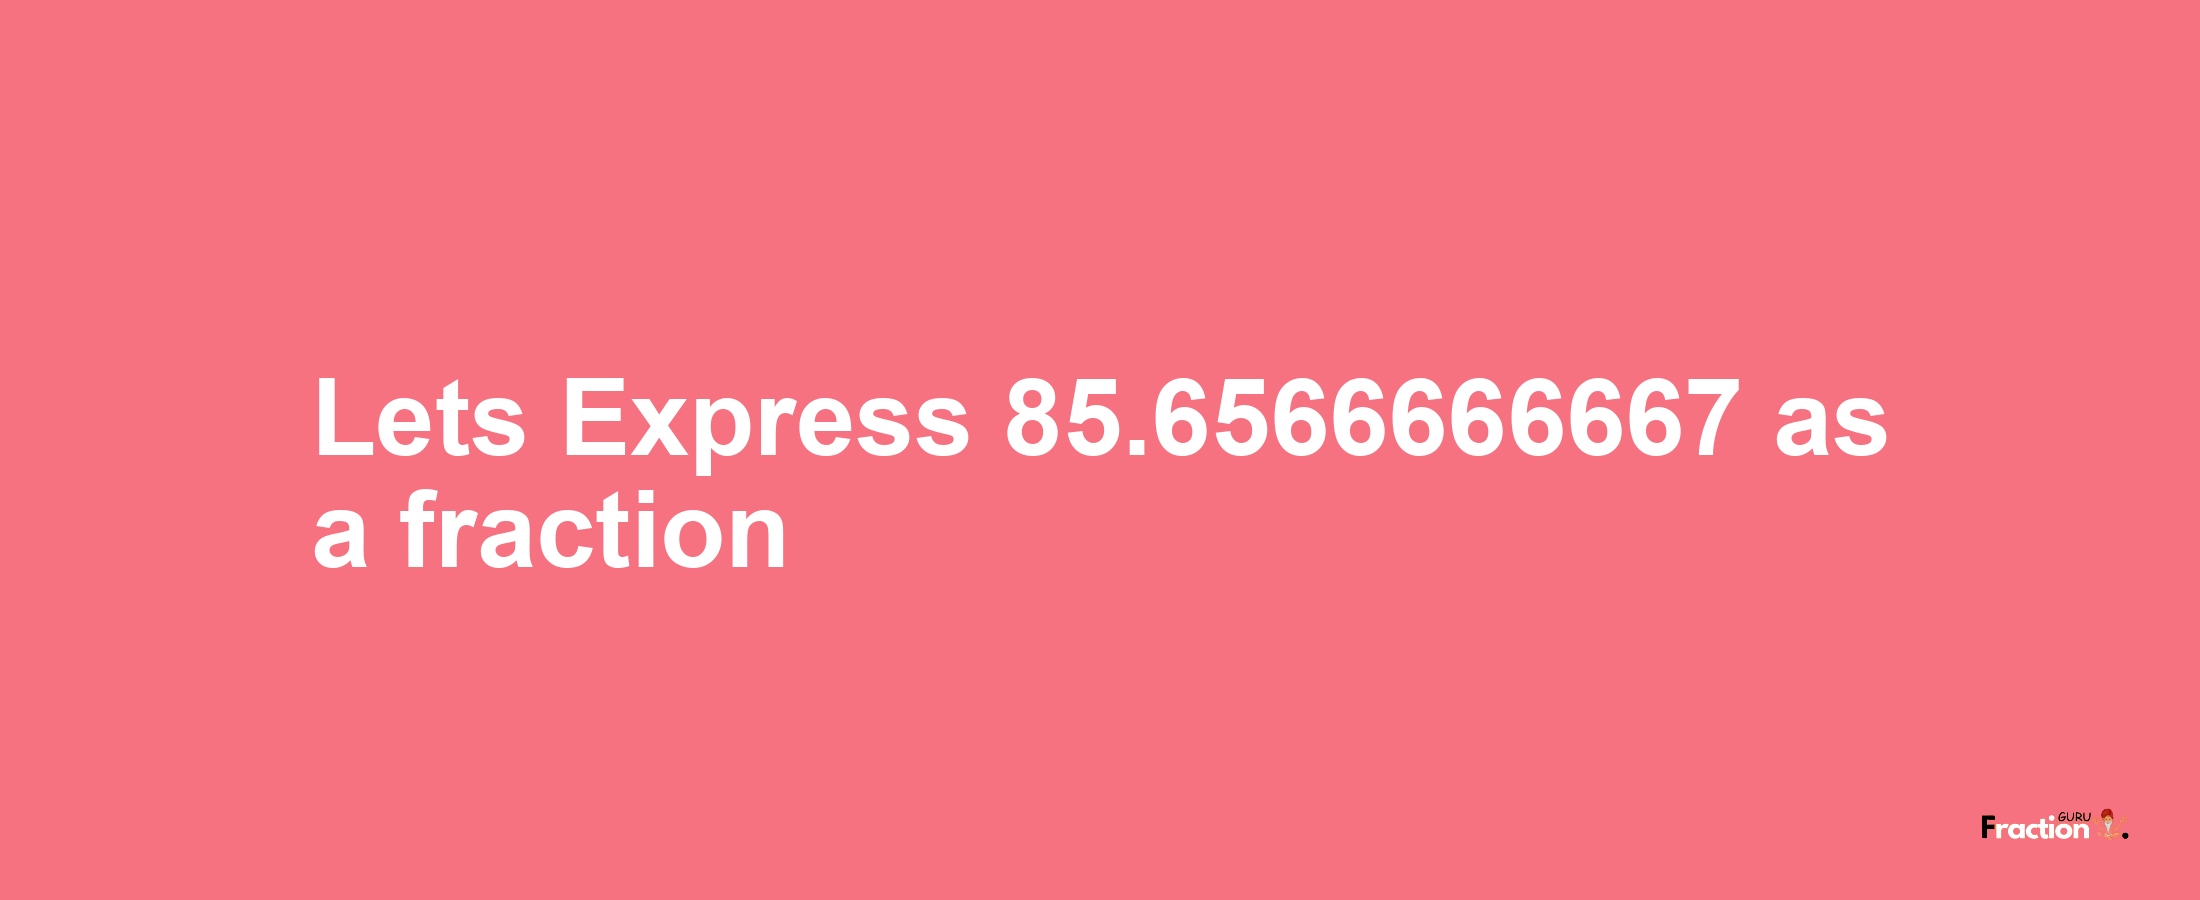 Lets Express 85.6566666667 as afraction